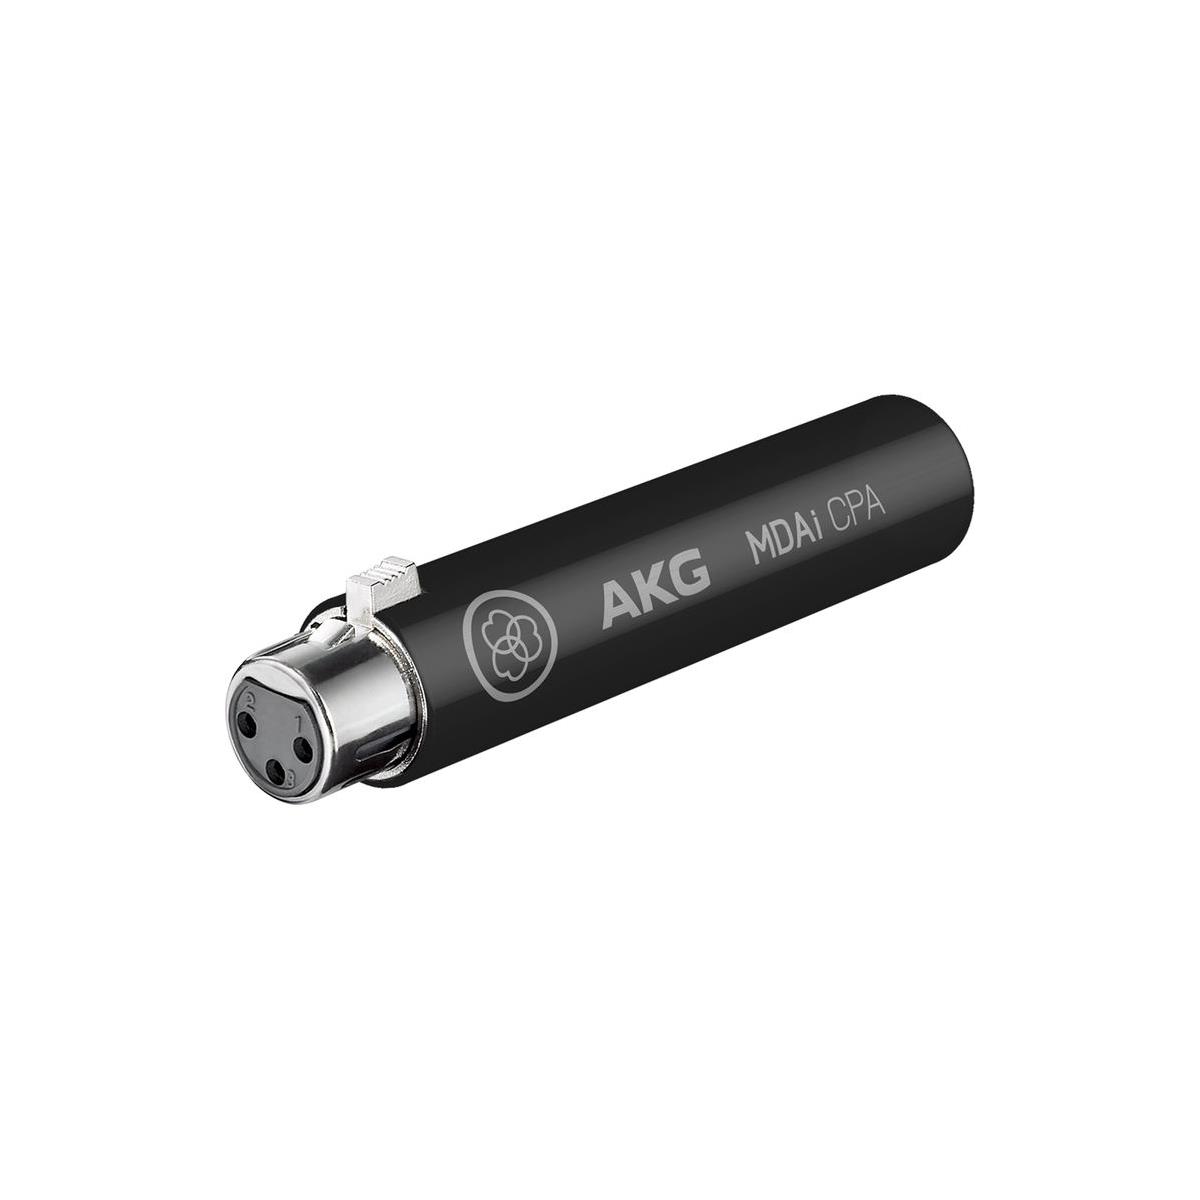 Image of AKG MDAi CPA Connected PA Microphone Adapter